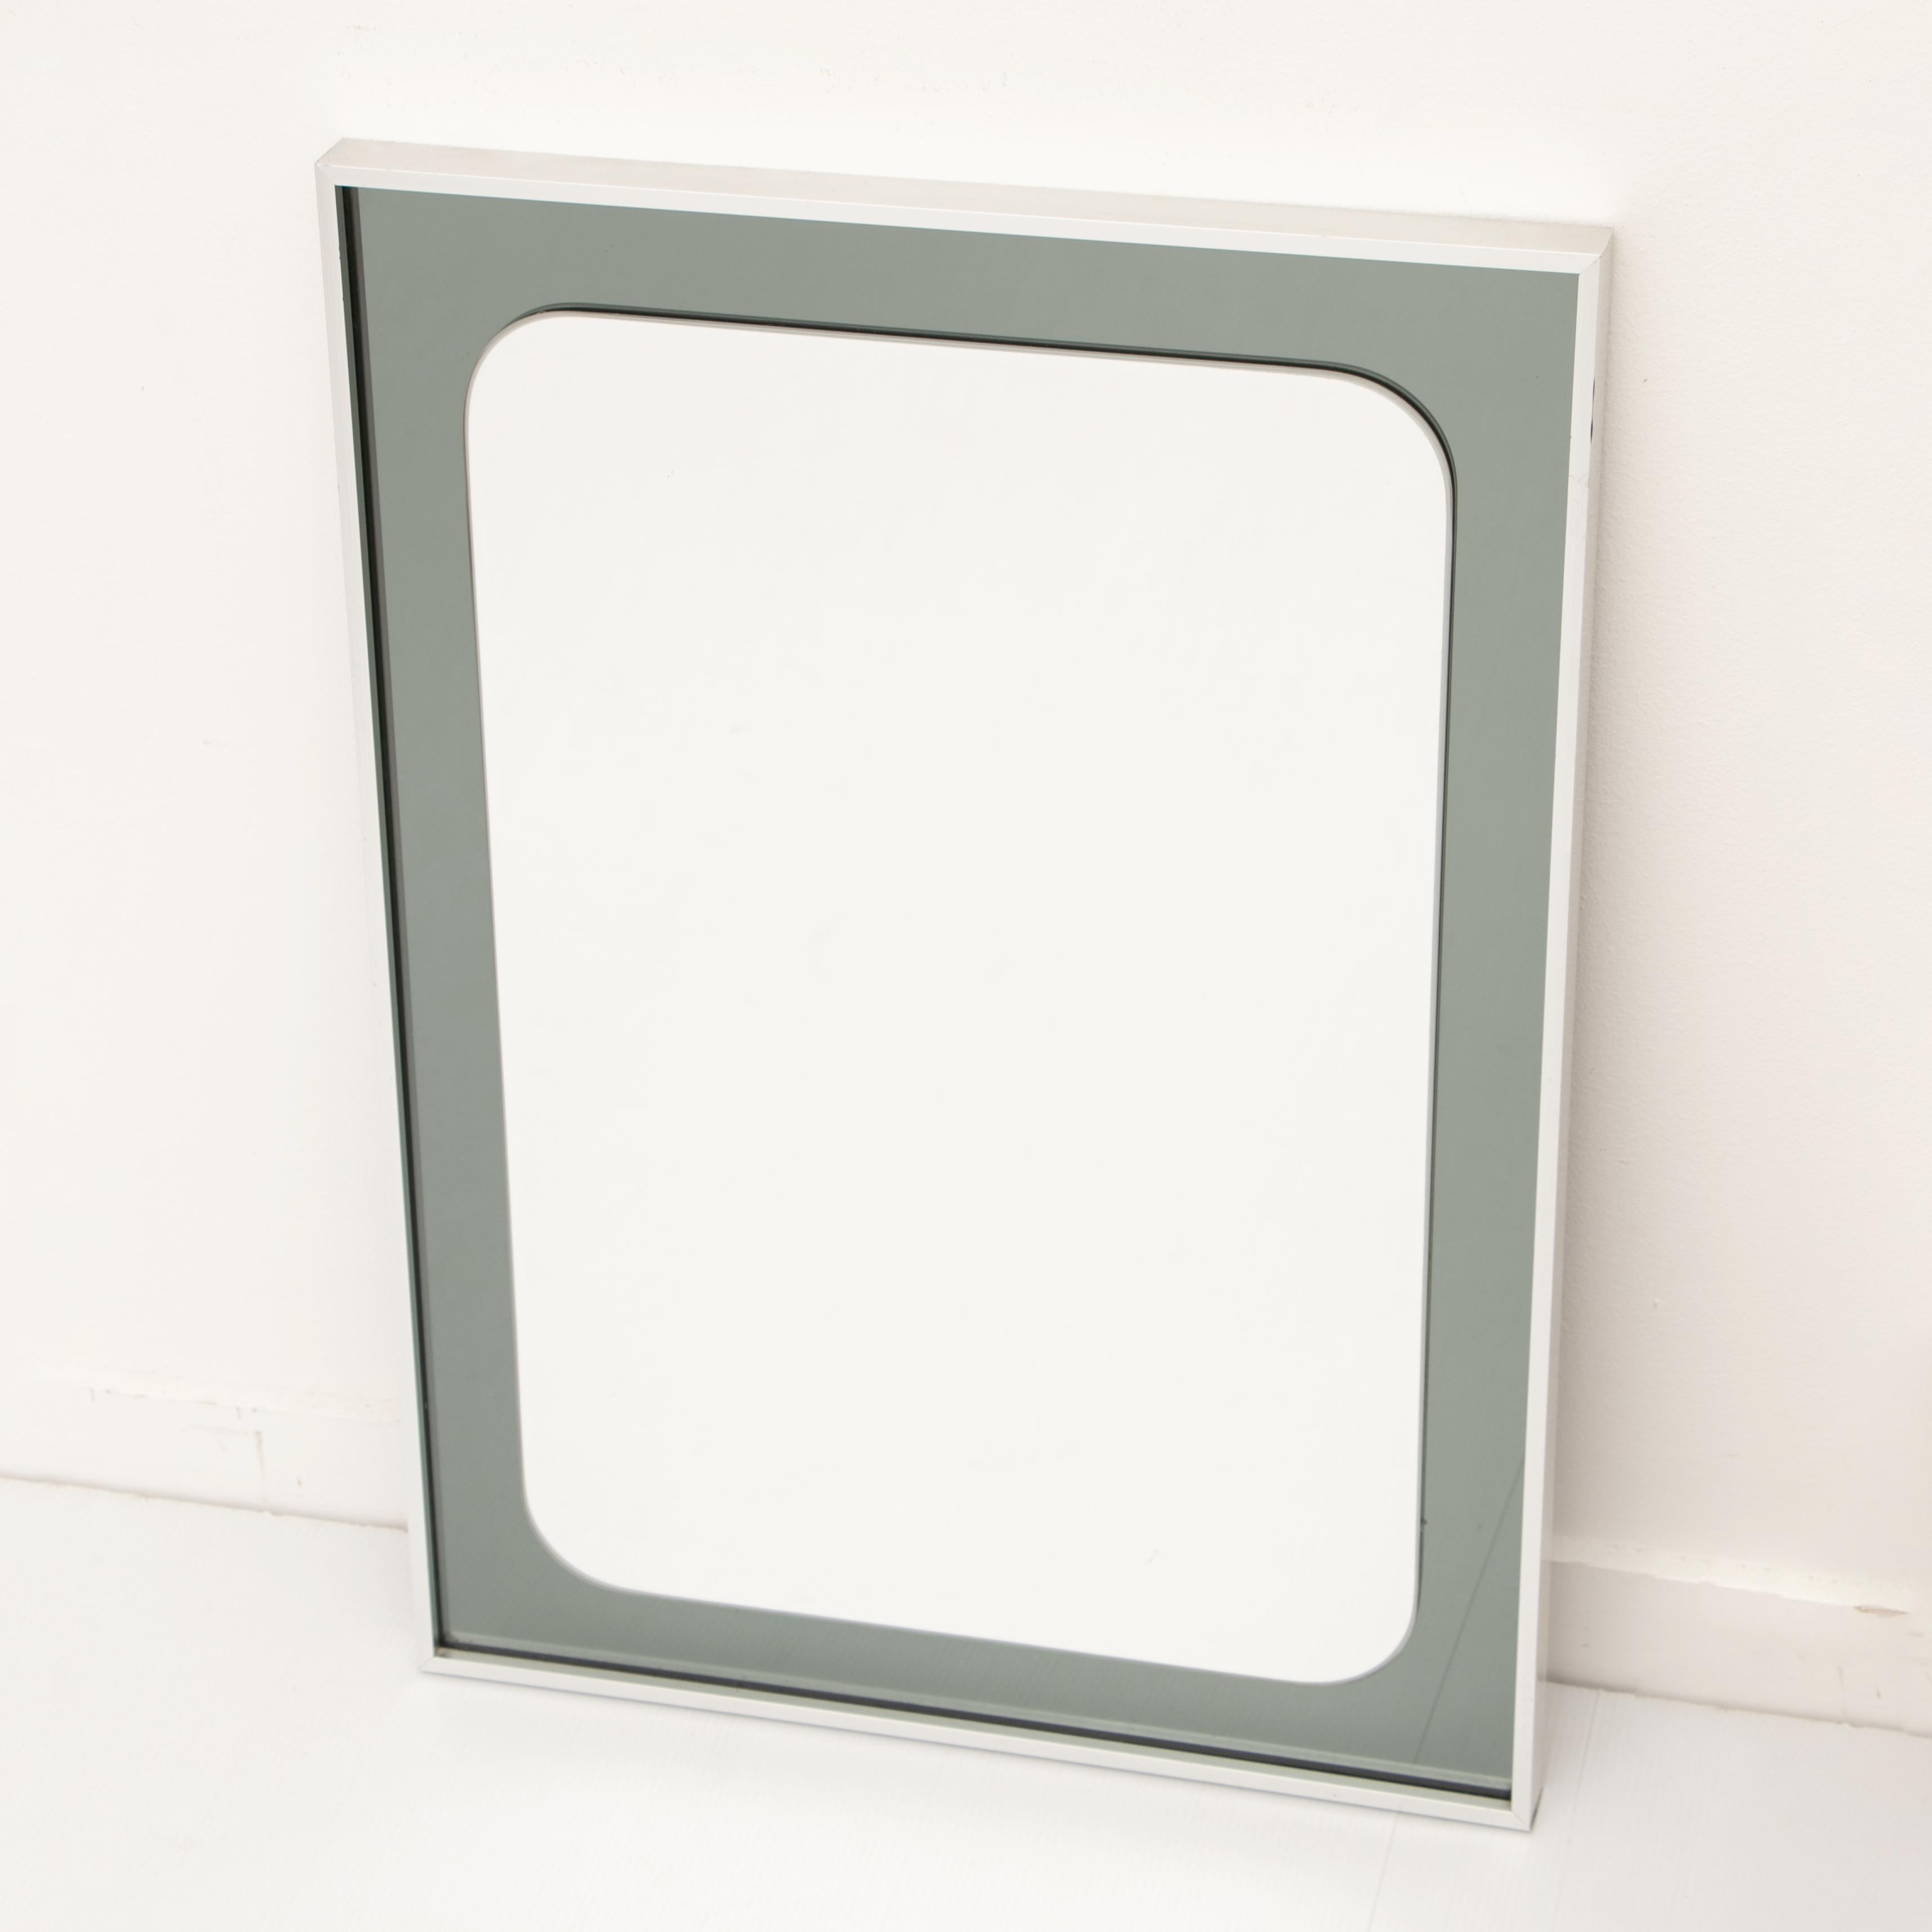 1980s Belgian rectangular two-tone wall mirror manufactured by Knitter Duro with a surrounding aluminum frame. Perfect for a hallway or bathroom. In very good vintage condition. Heavy and well made.

Measures: H 71 cm, W 50.5 cm, D 3.5 cm.